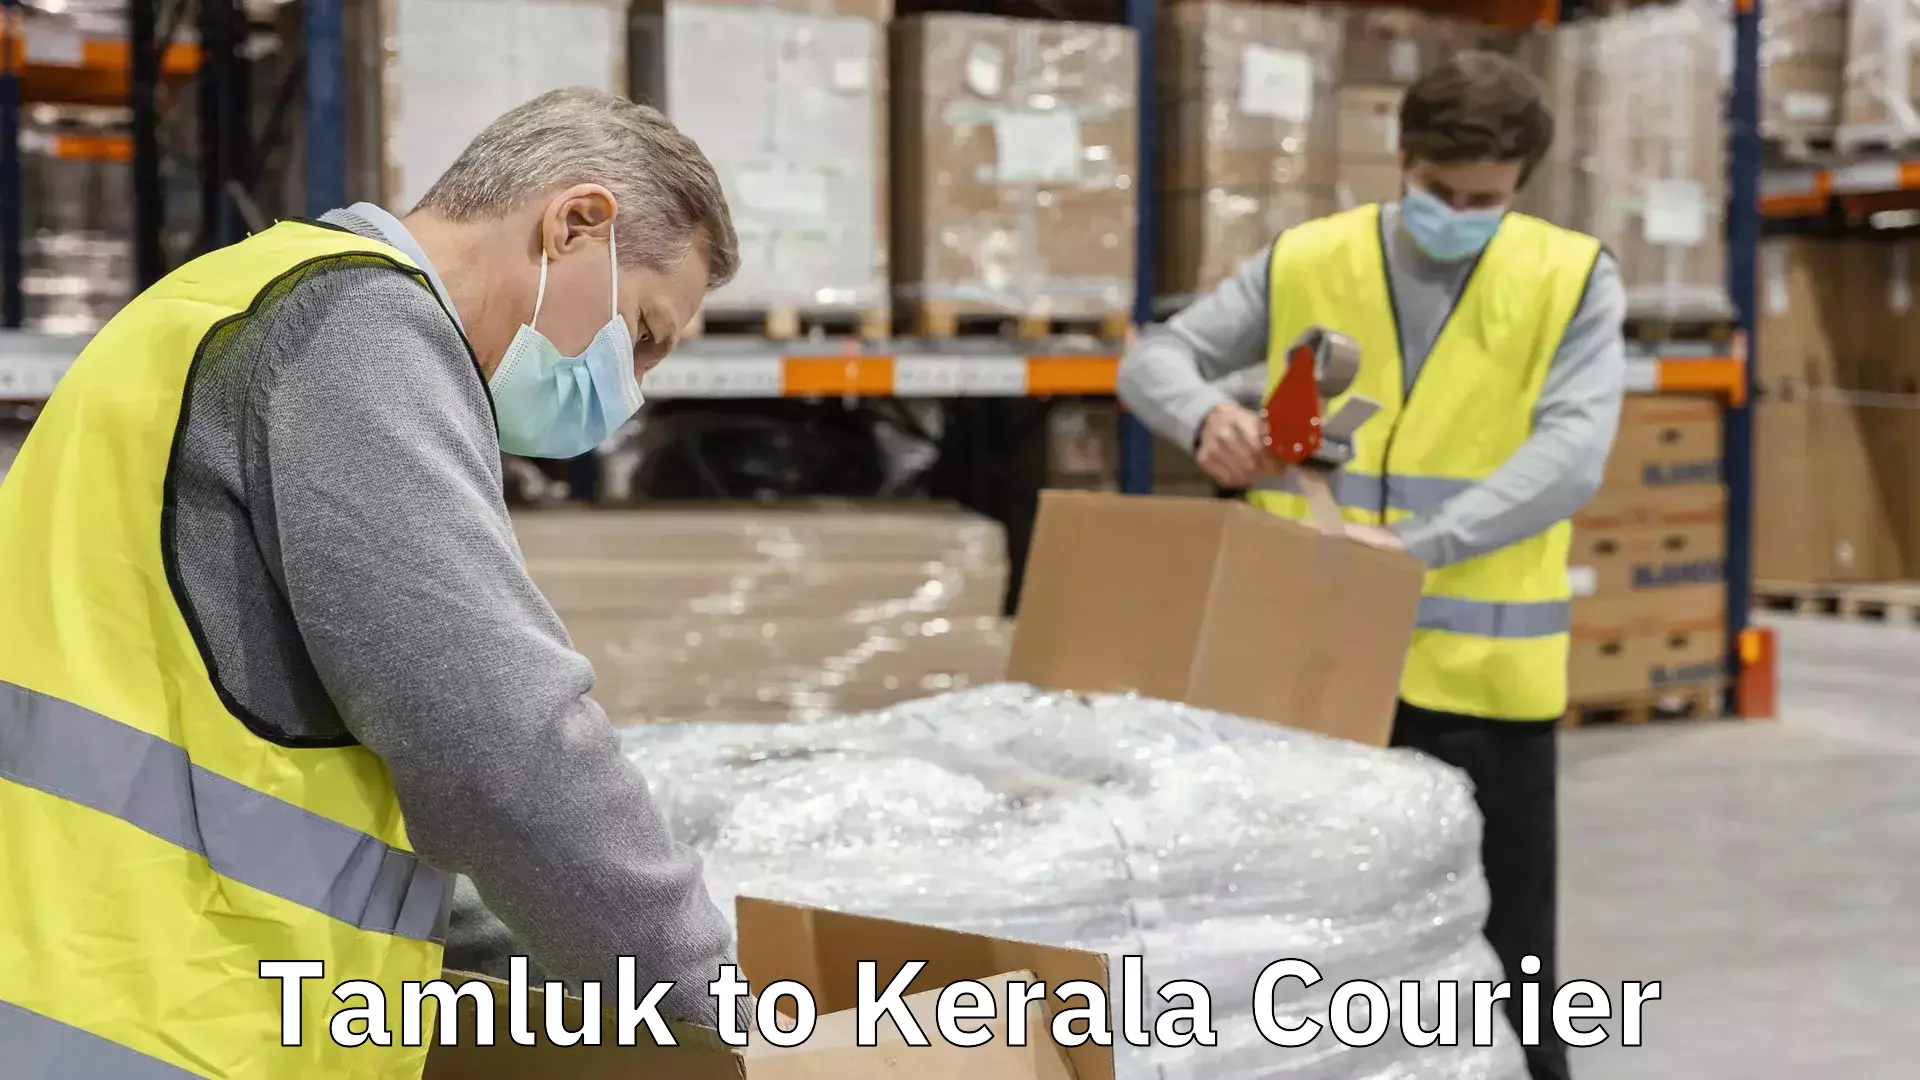 Automated parcel services Tamluk to Kerala